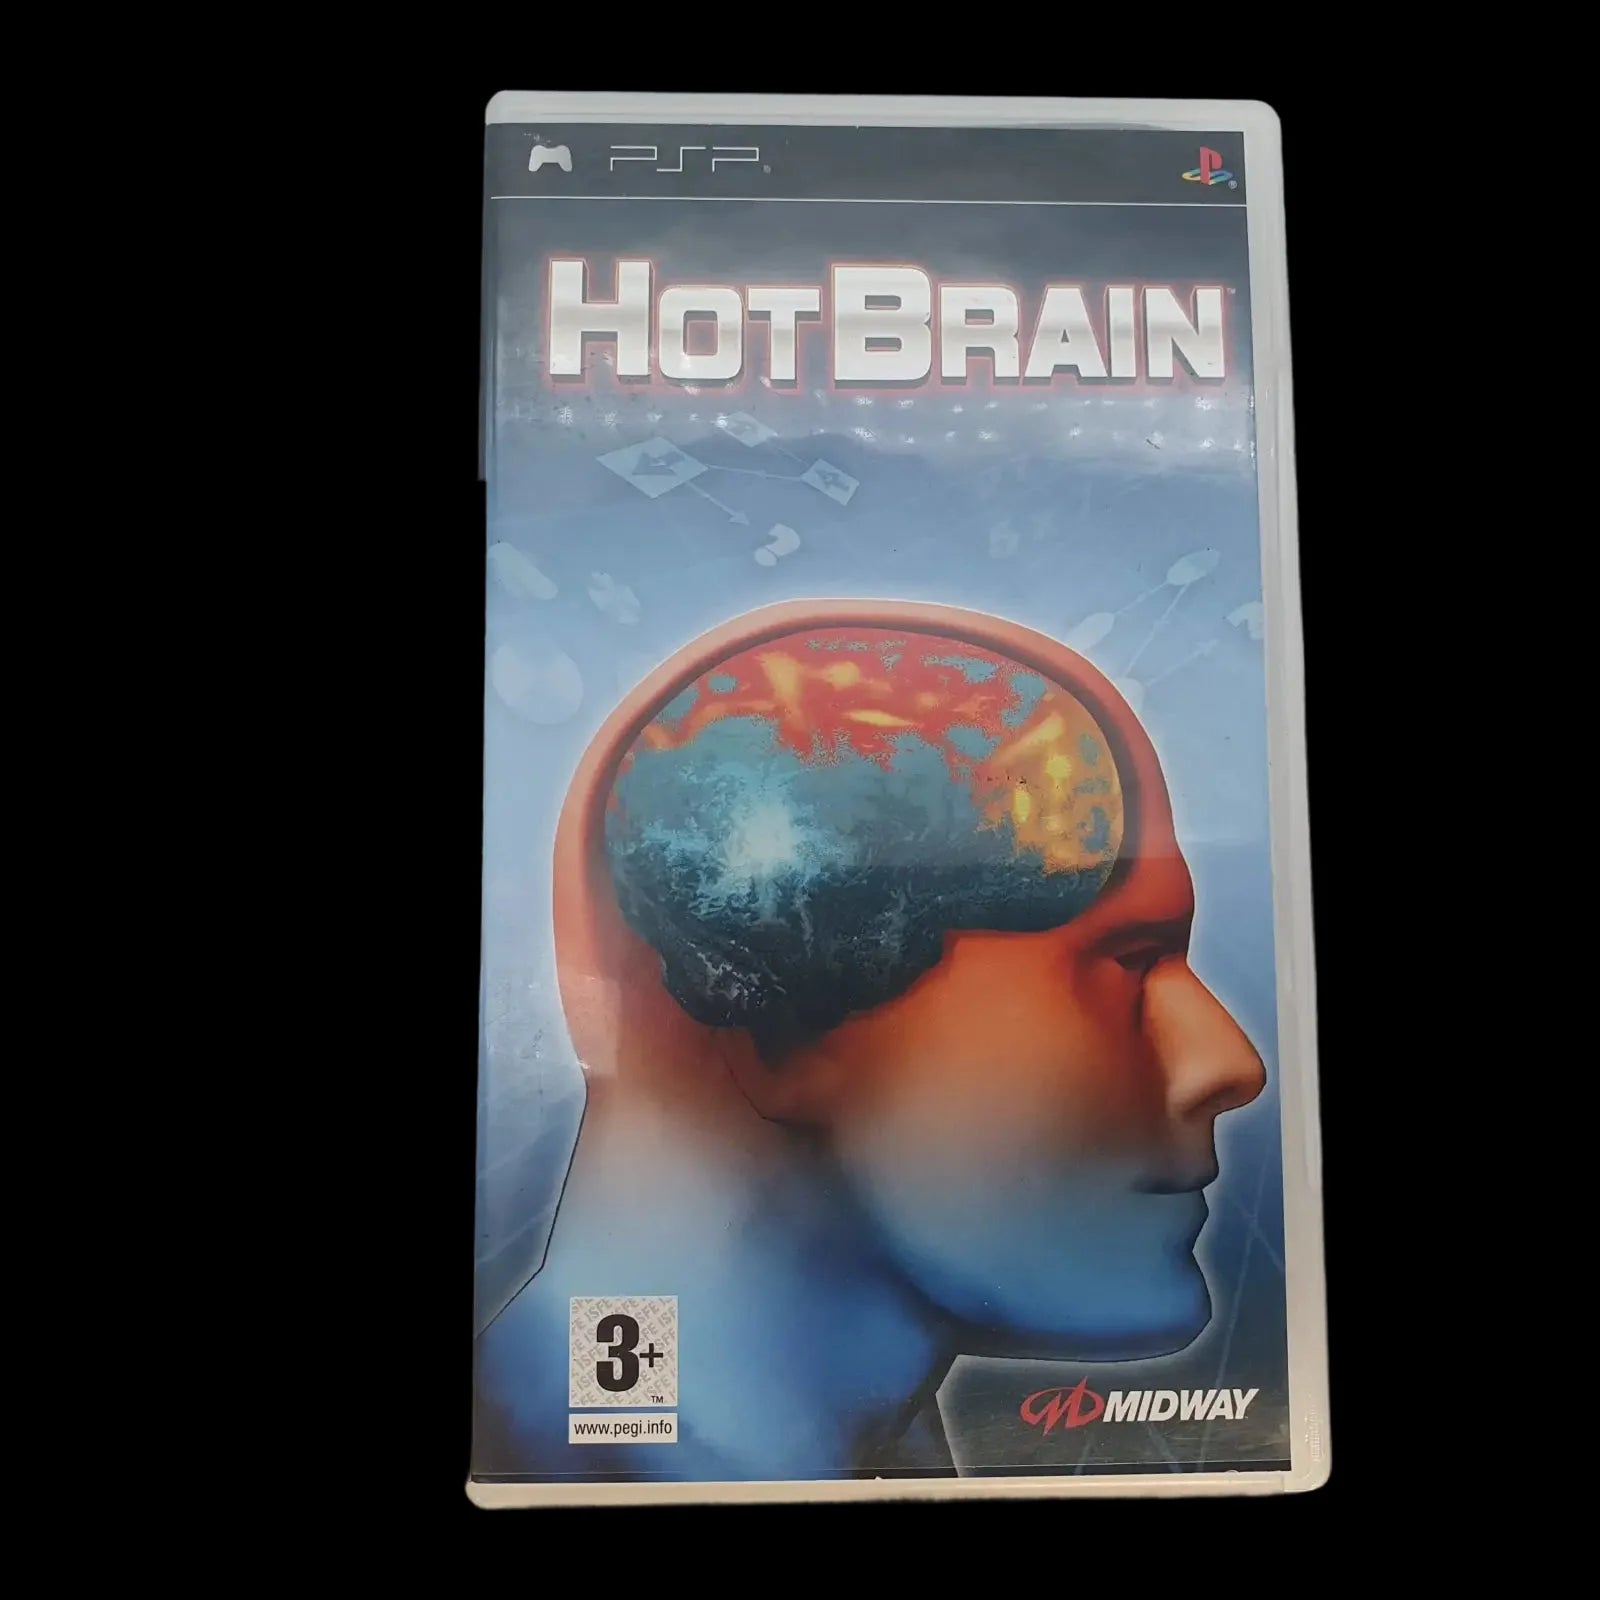 Hot Brain Sony Playstation Portable Psp Midway 2007 Video